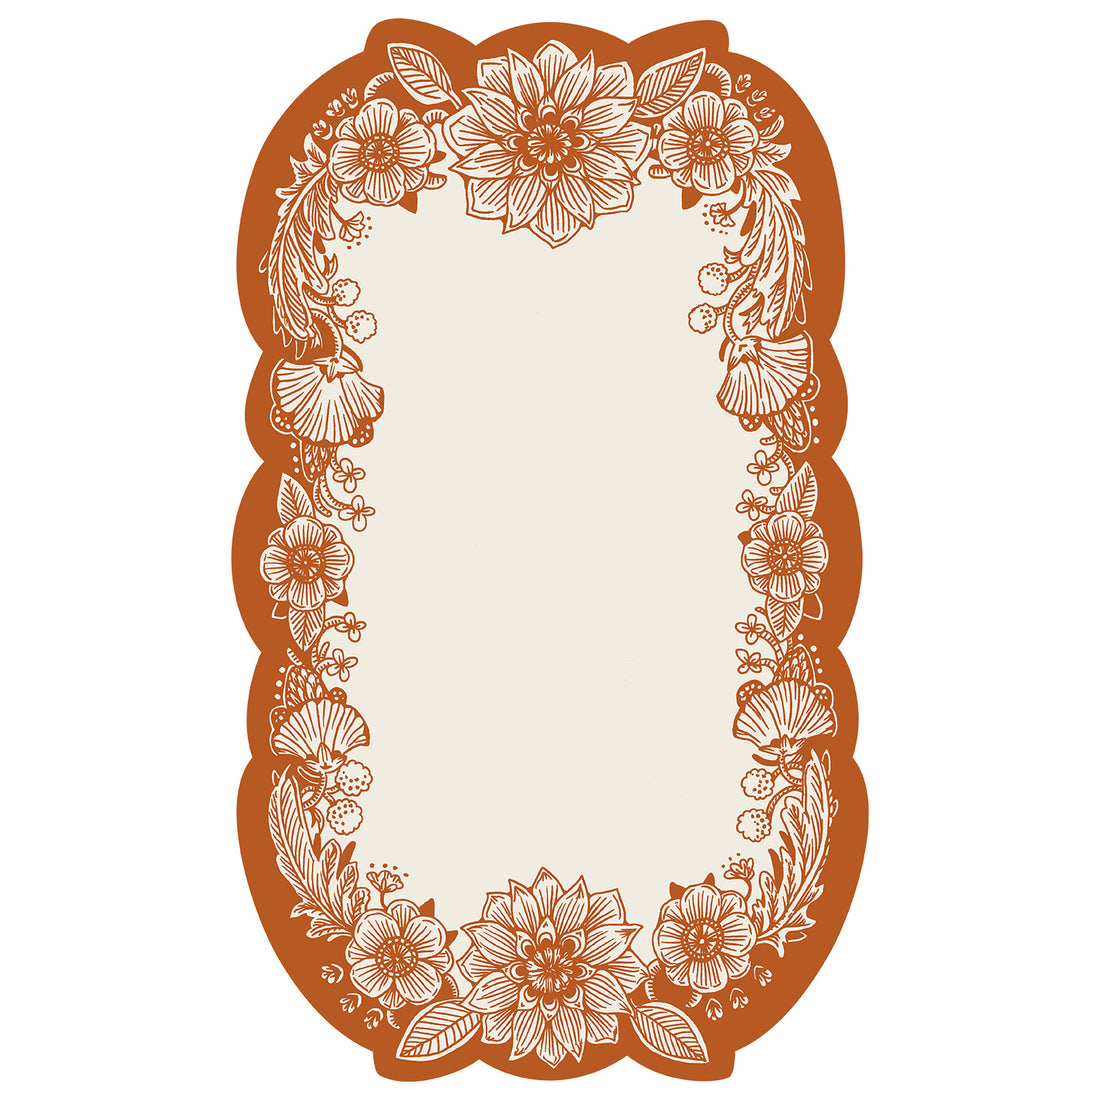 A white, die-cut rectangular card framed by an ornate floral design in orange linework surrounding a blank white center rectangle for personalization.